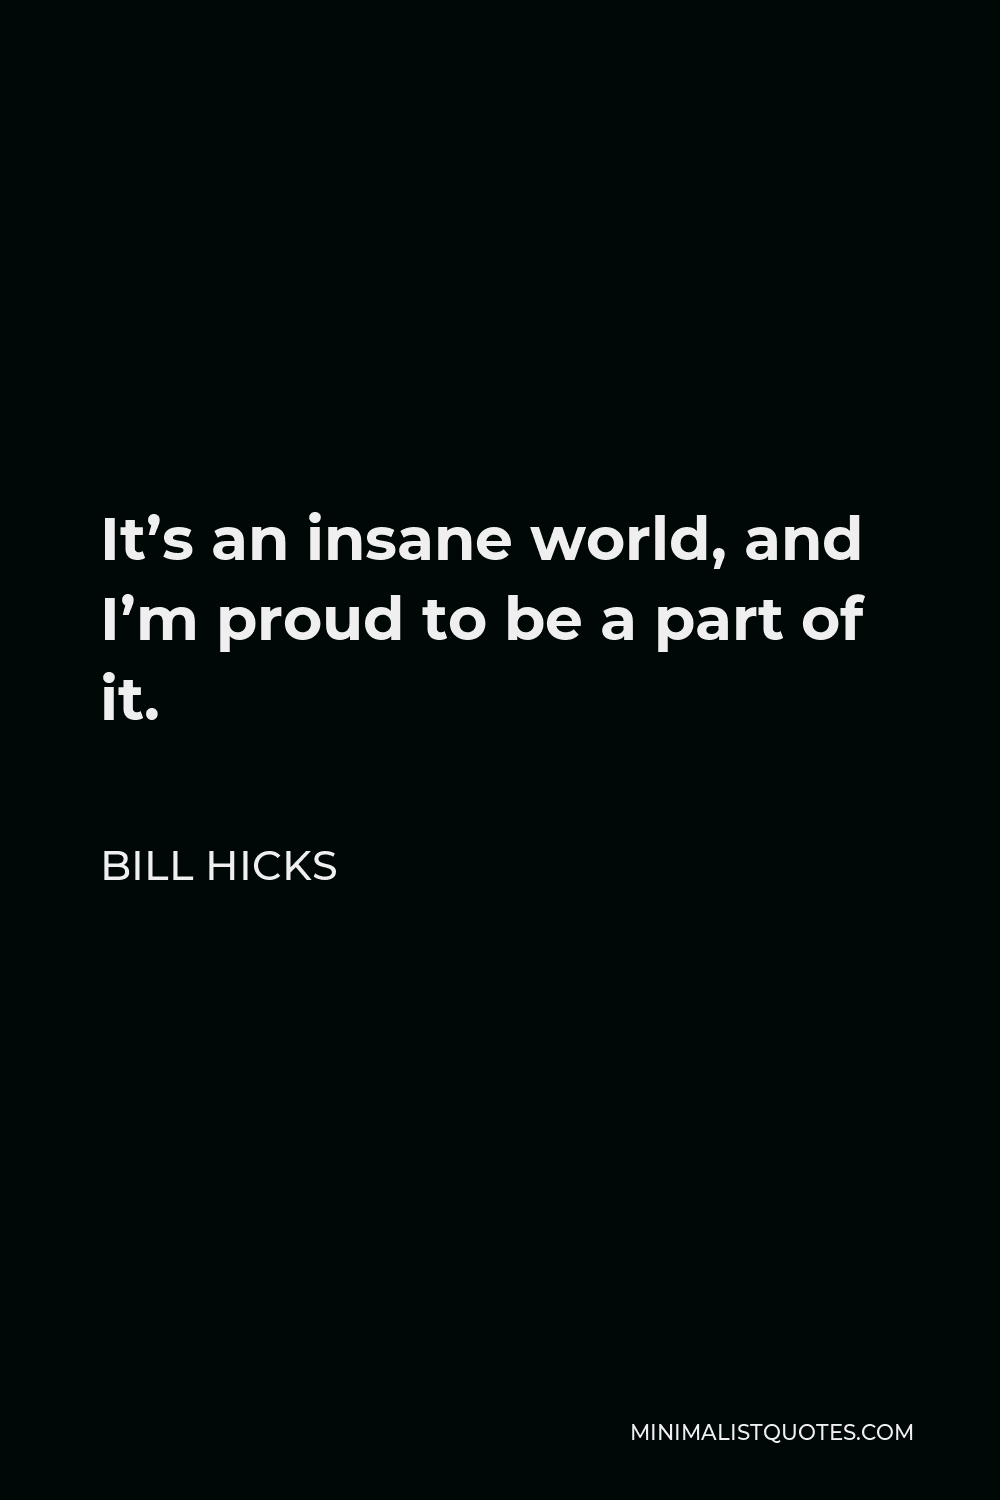 Bill Hicks Quote - It’s an insane world, and I’m proud to be a part of it.